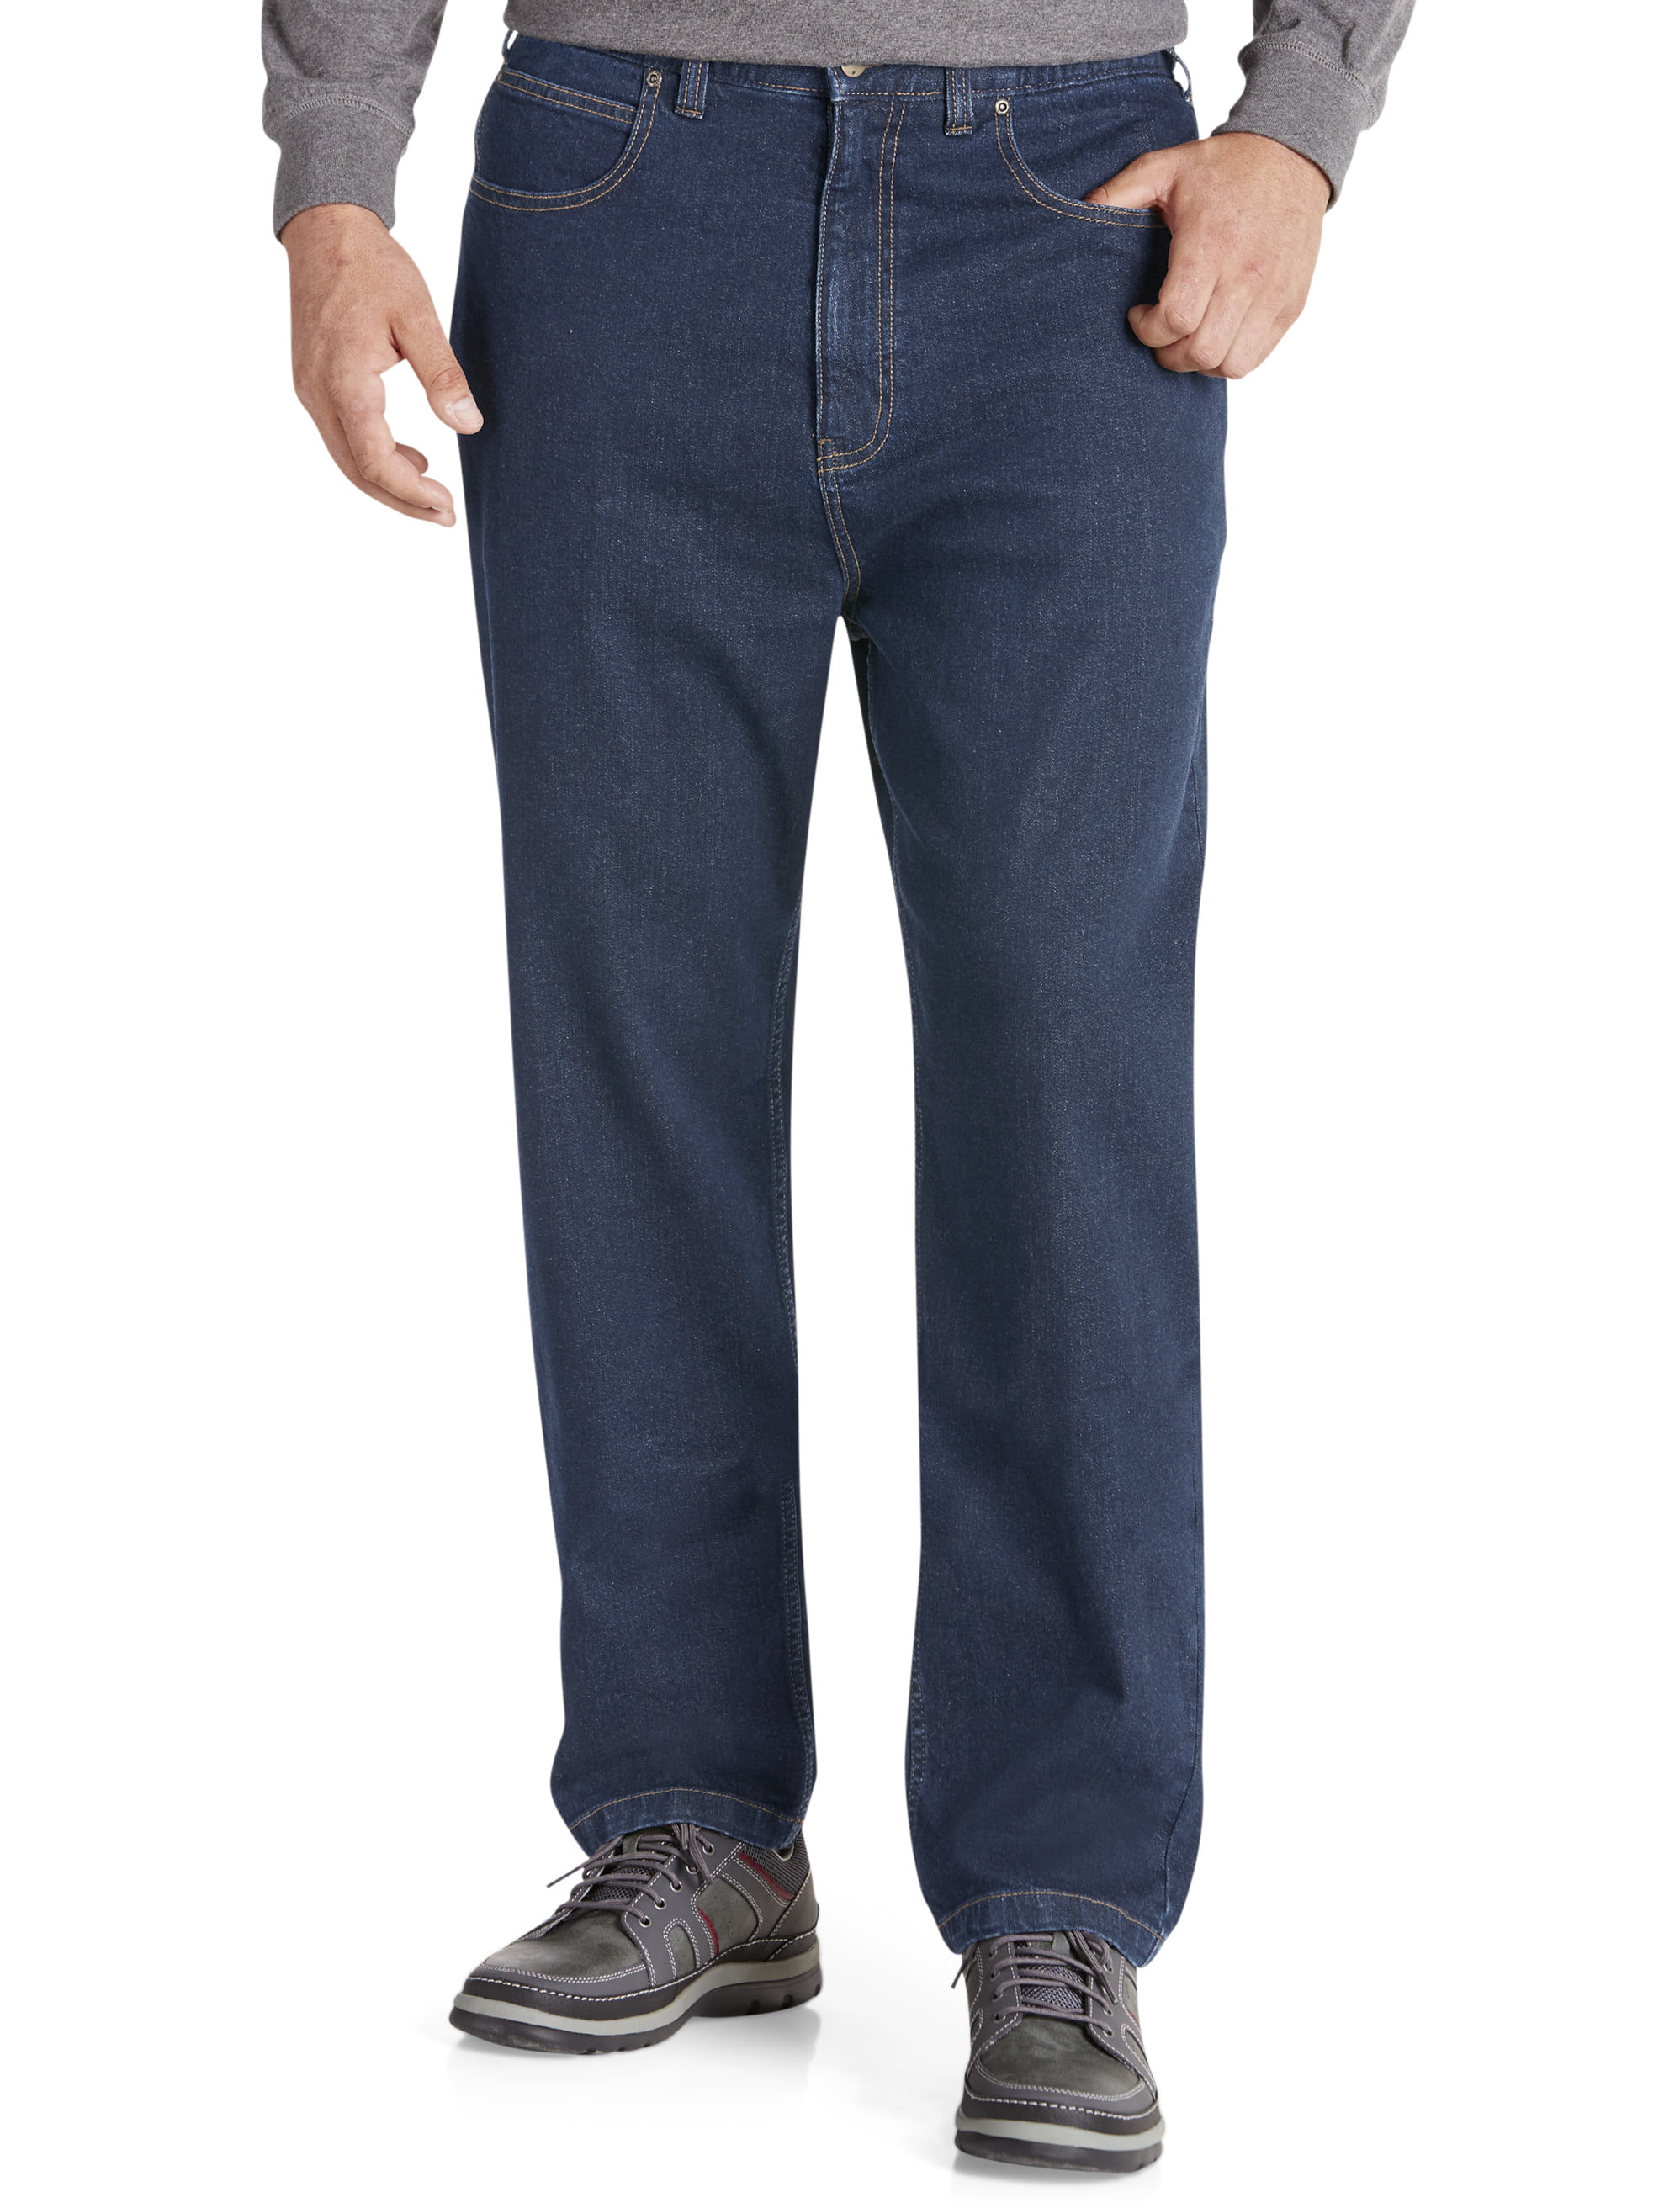 Harbor Bay by DXL Big and Tall Men's Continuous Comfort Stretch Jeans ...